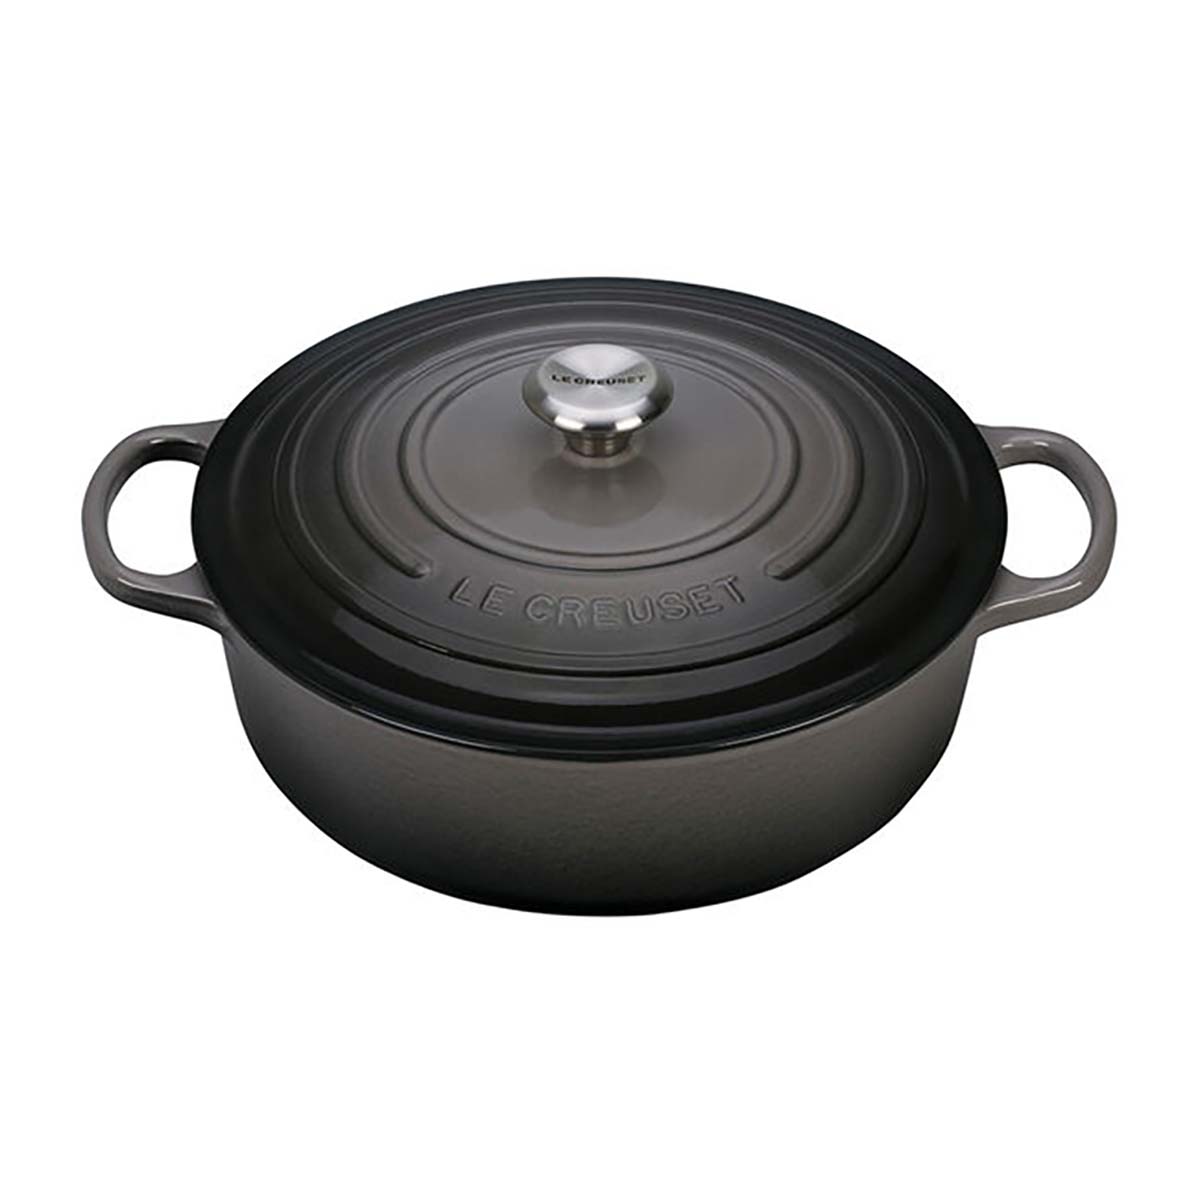 Le Creuset Sinature Round Wide Oven 6.75 qt - Oyster